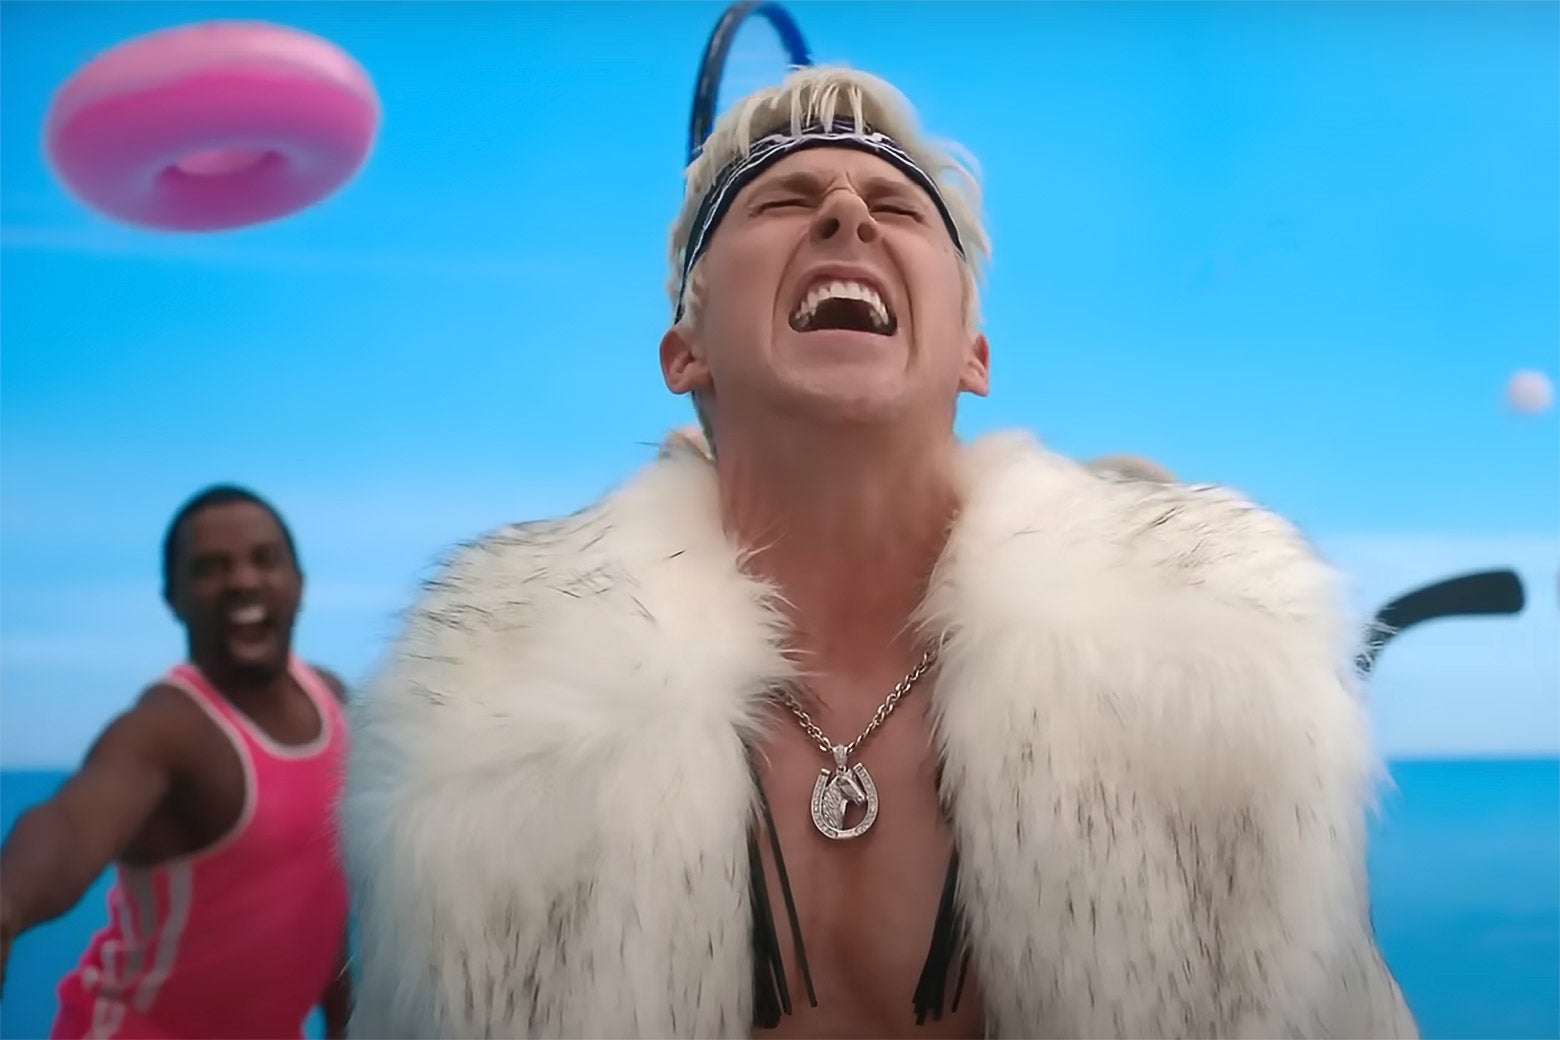 Ryan Gosling wearing a fur vest and a headband while singing with feeling in the Barbie movie.